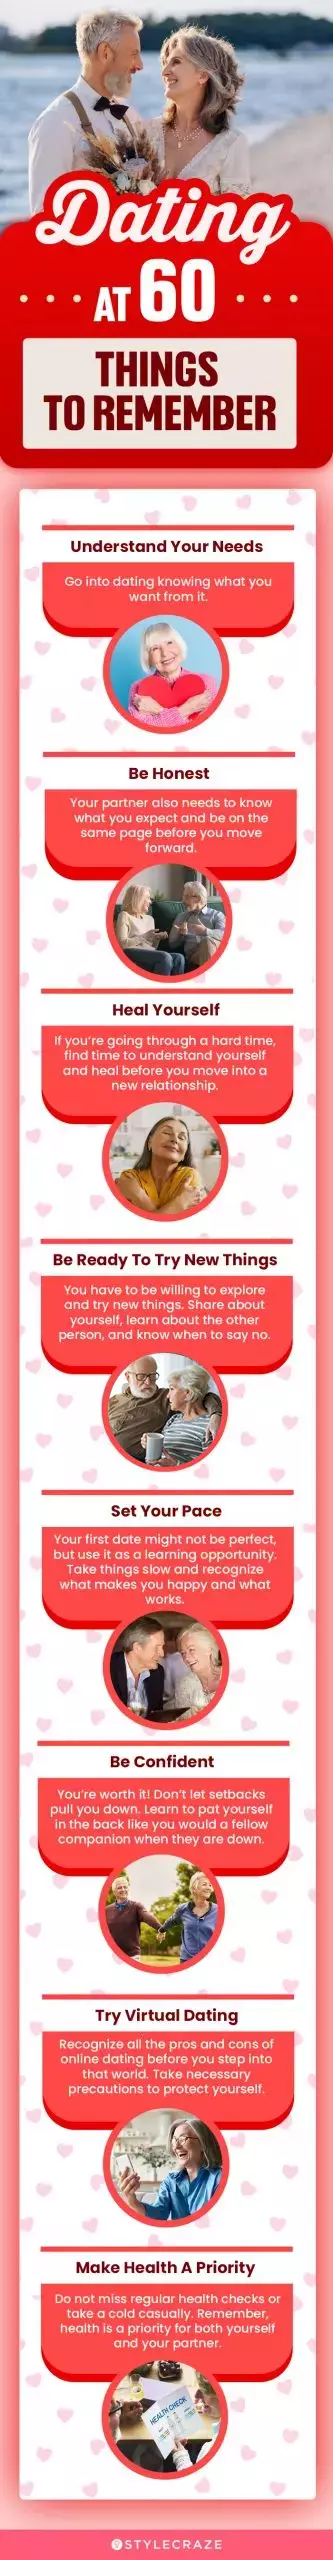 dating at 60 things to remember(infographic)